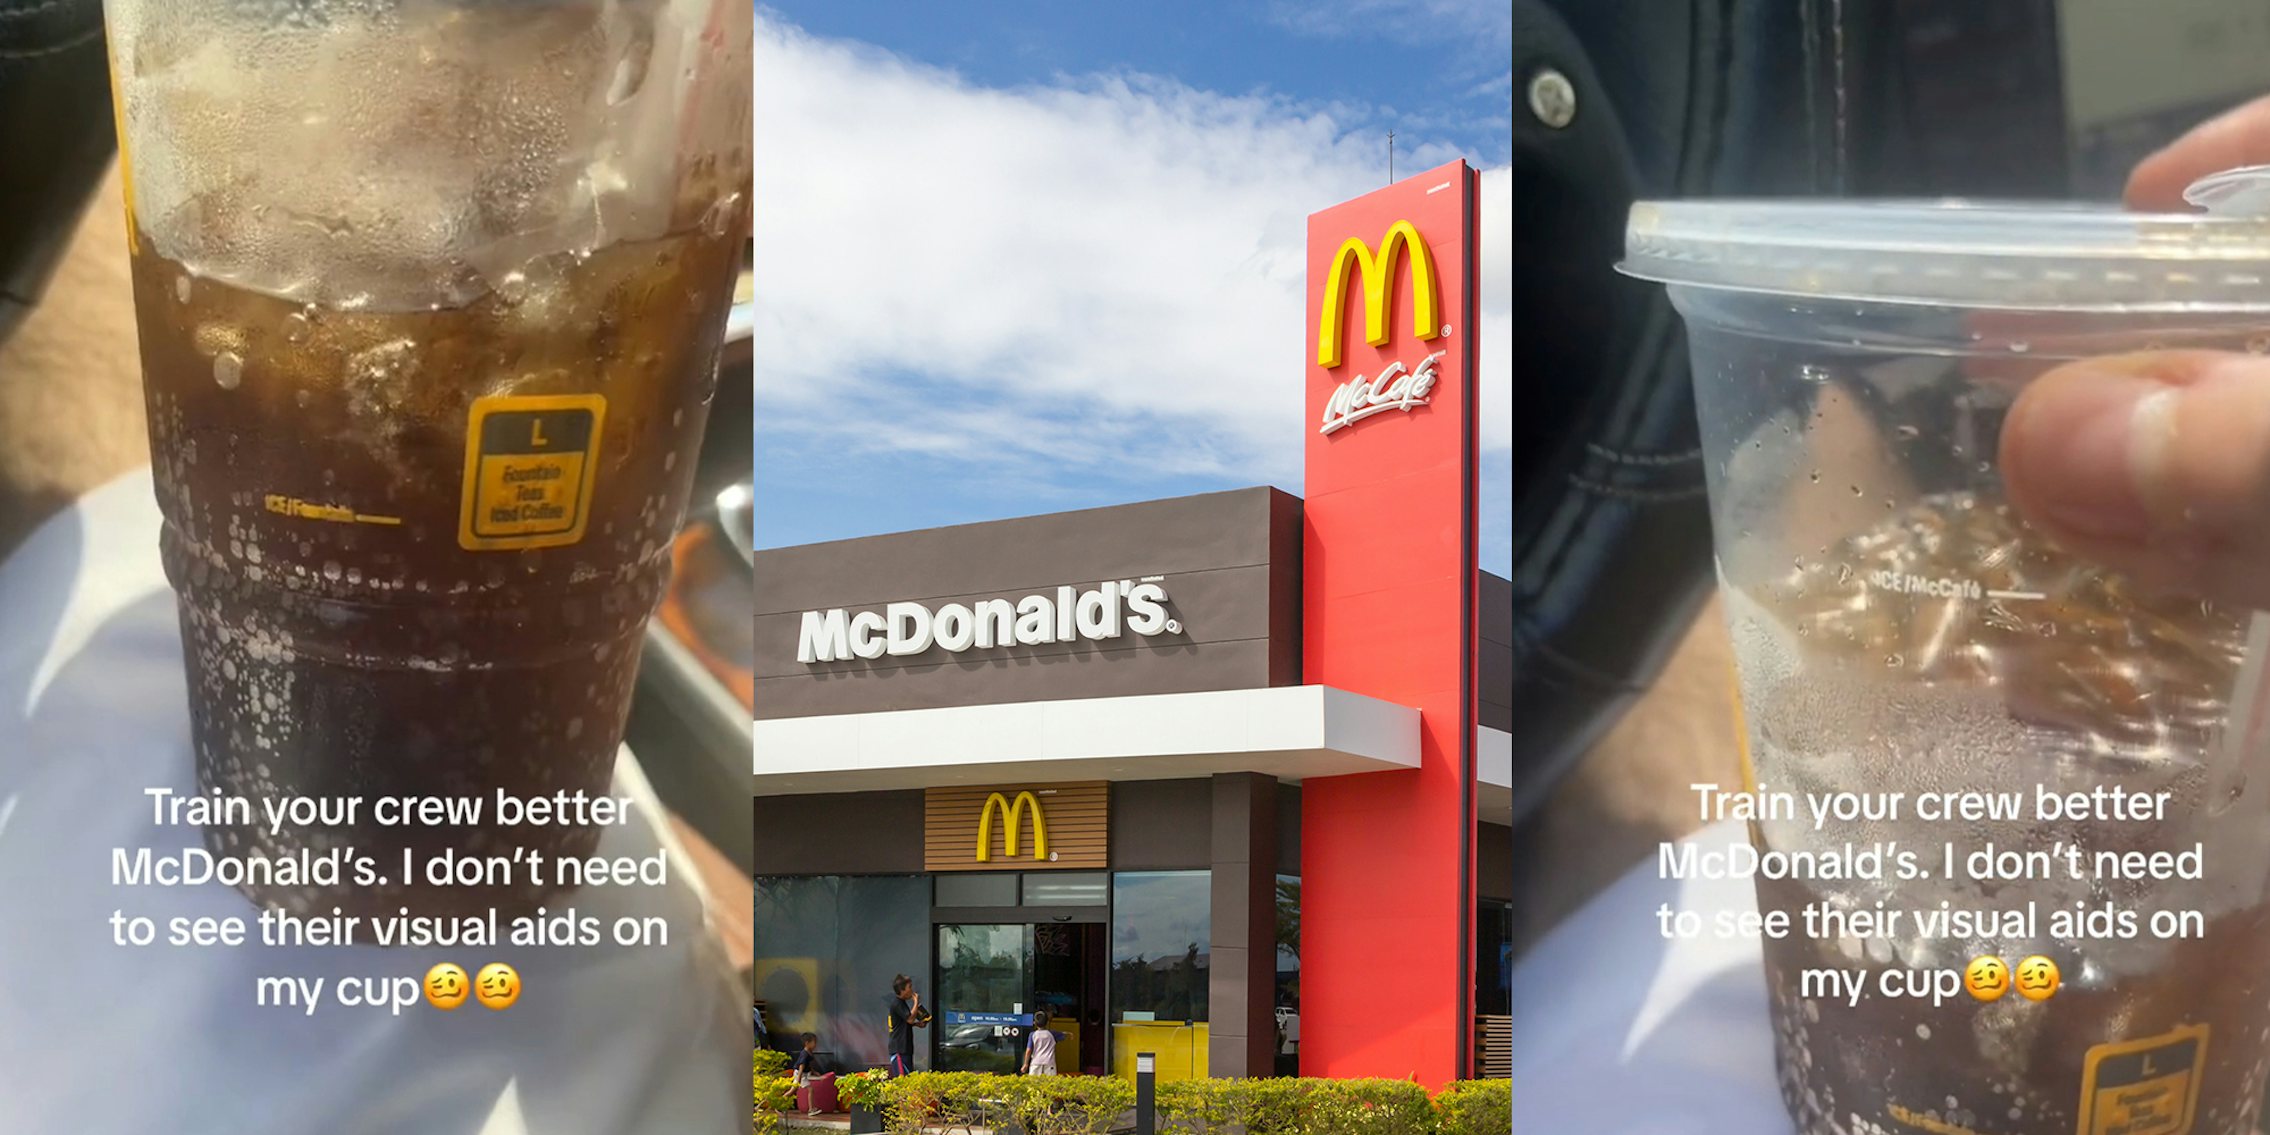 McDonalds Customer complains about 'visual aids' for workers on side of soda cup